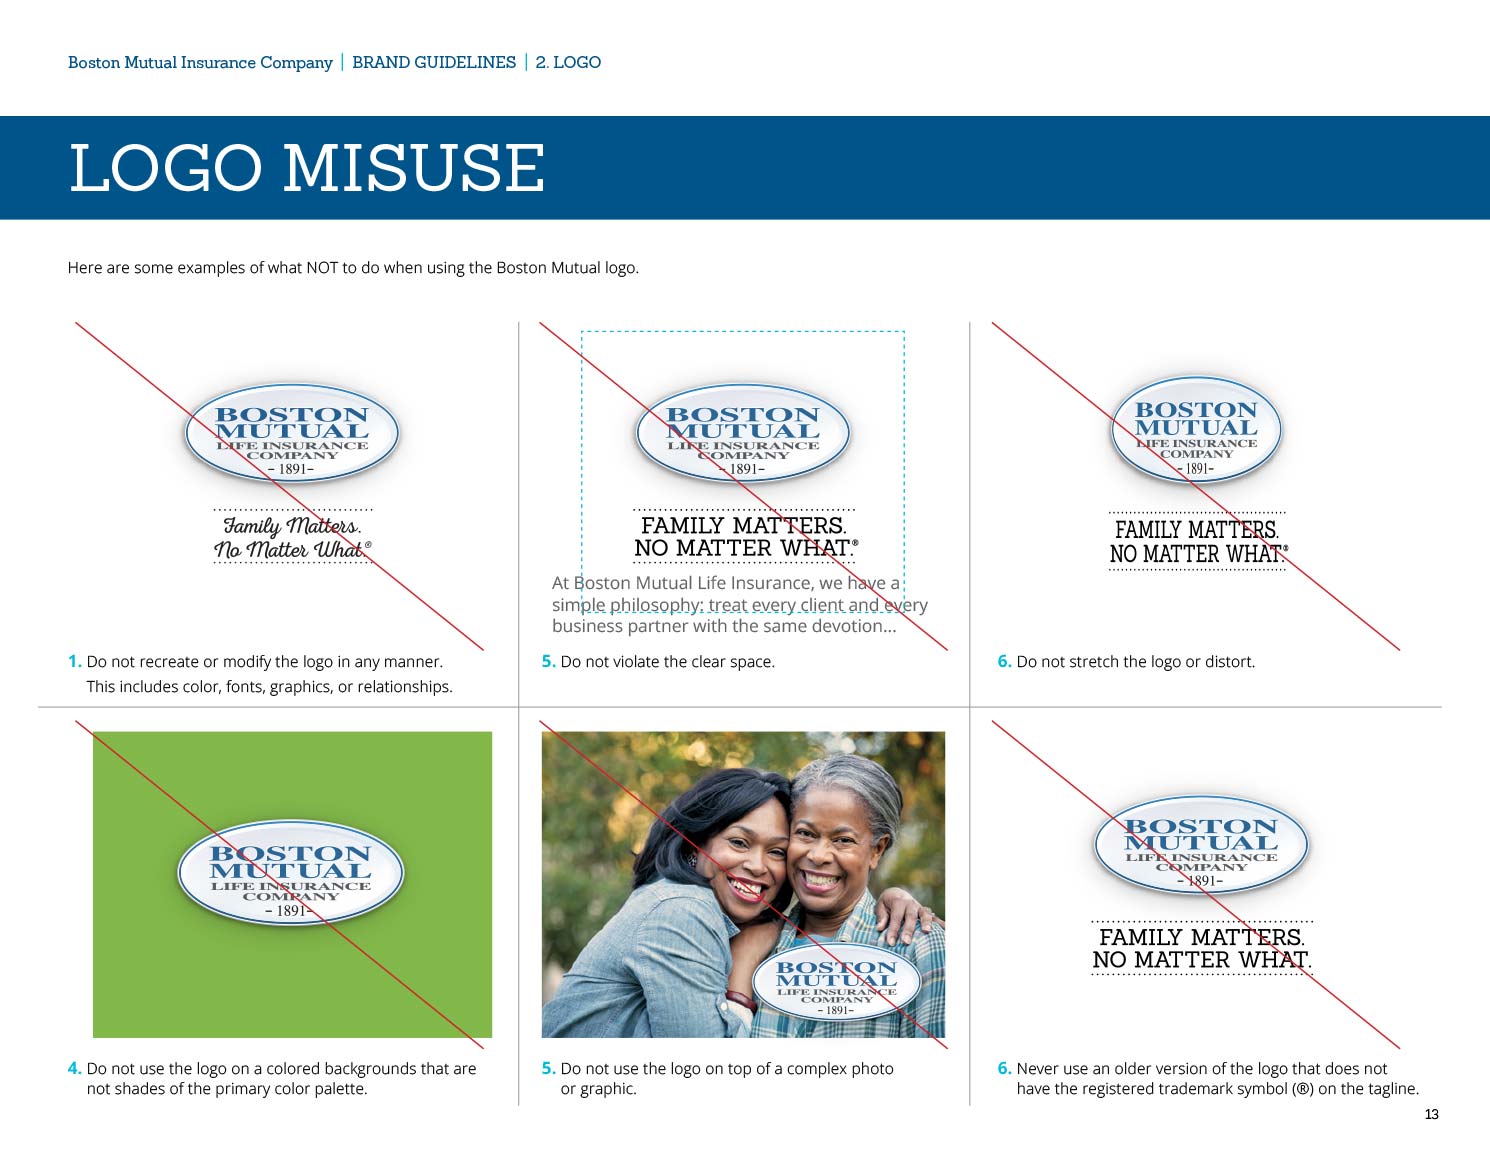 boston mutual brand guide page showing logo misuse